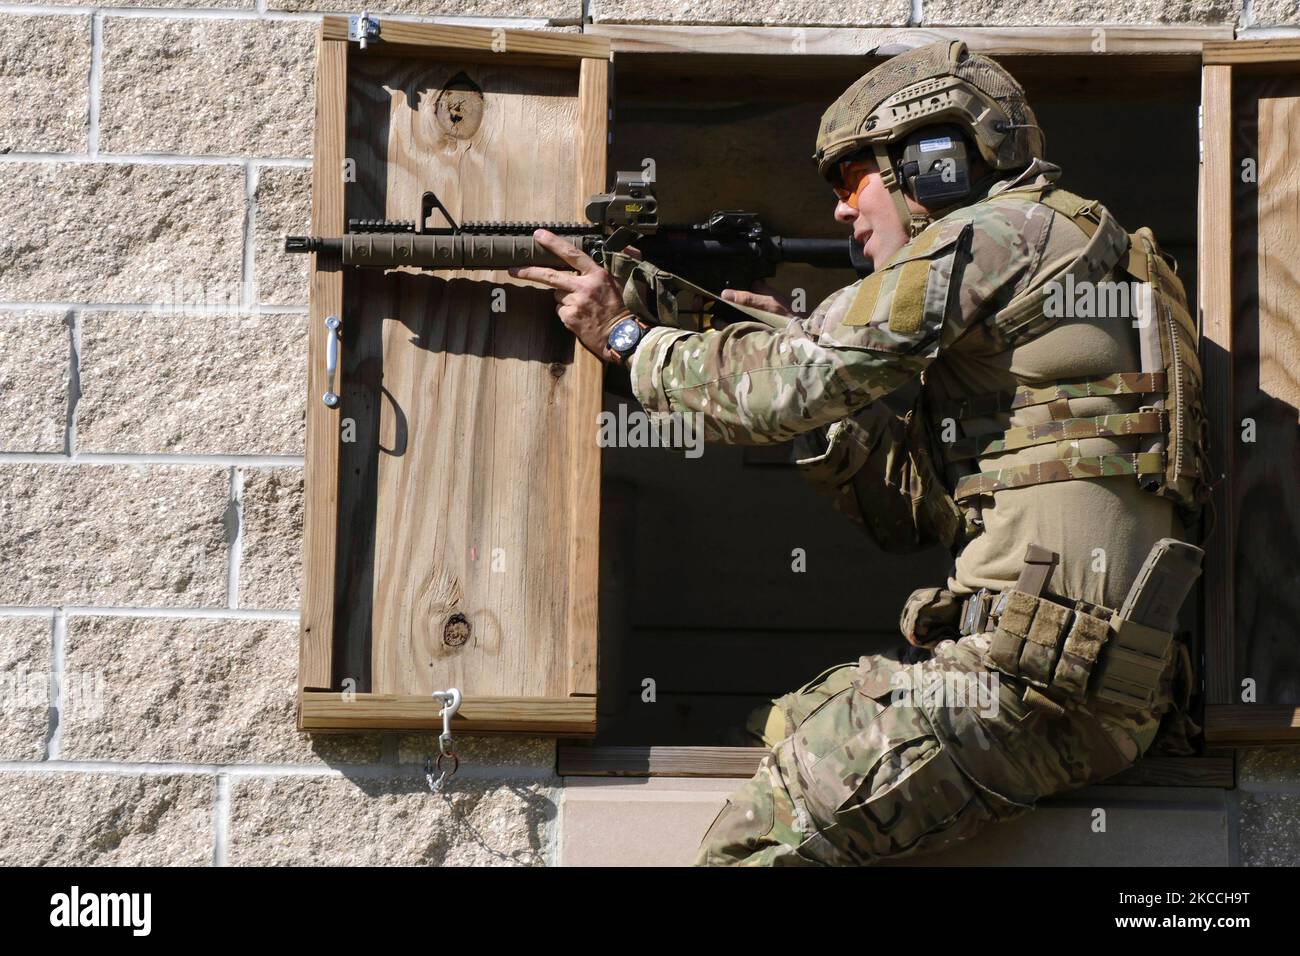 A Green Beret soldier fires a rifle. Stock Photo